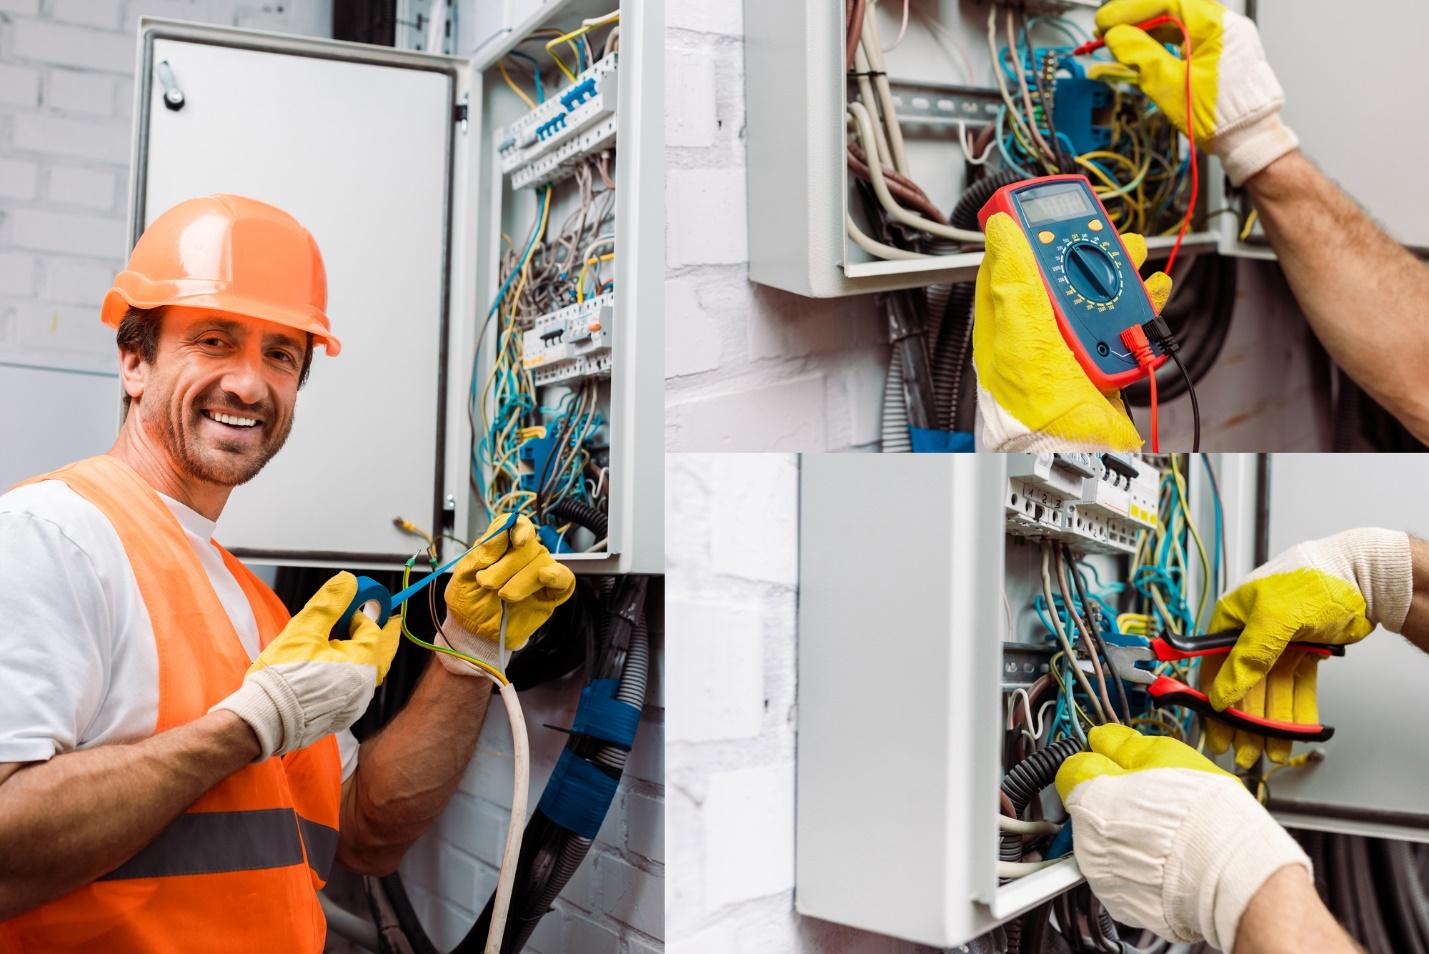 A person in orange vest and gloves working with wires

Description automatically generated